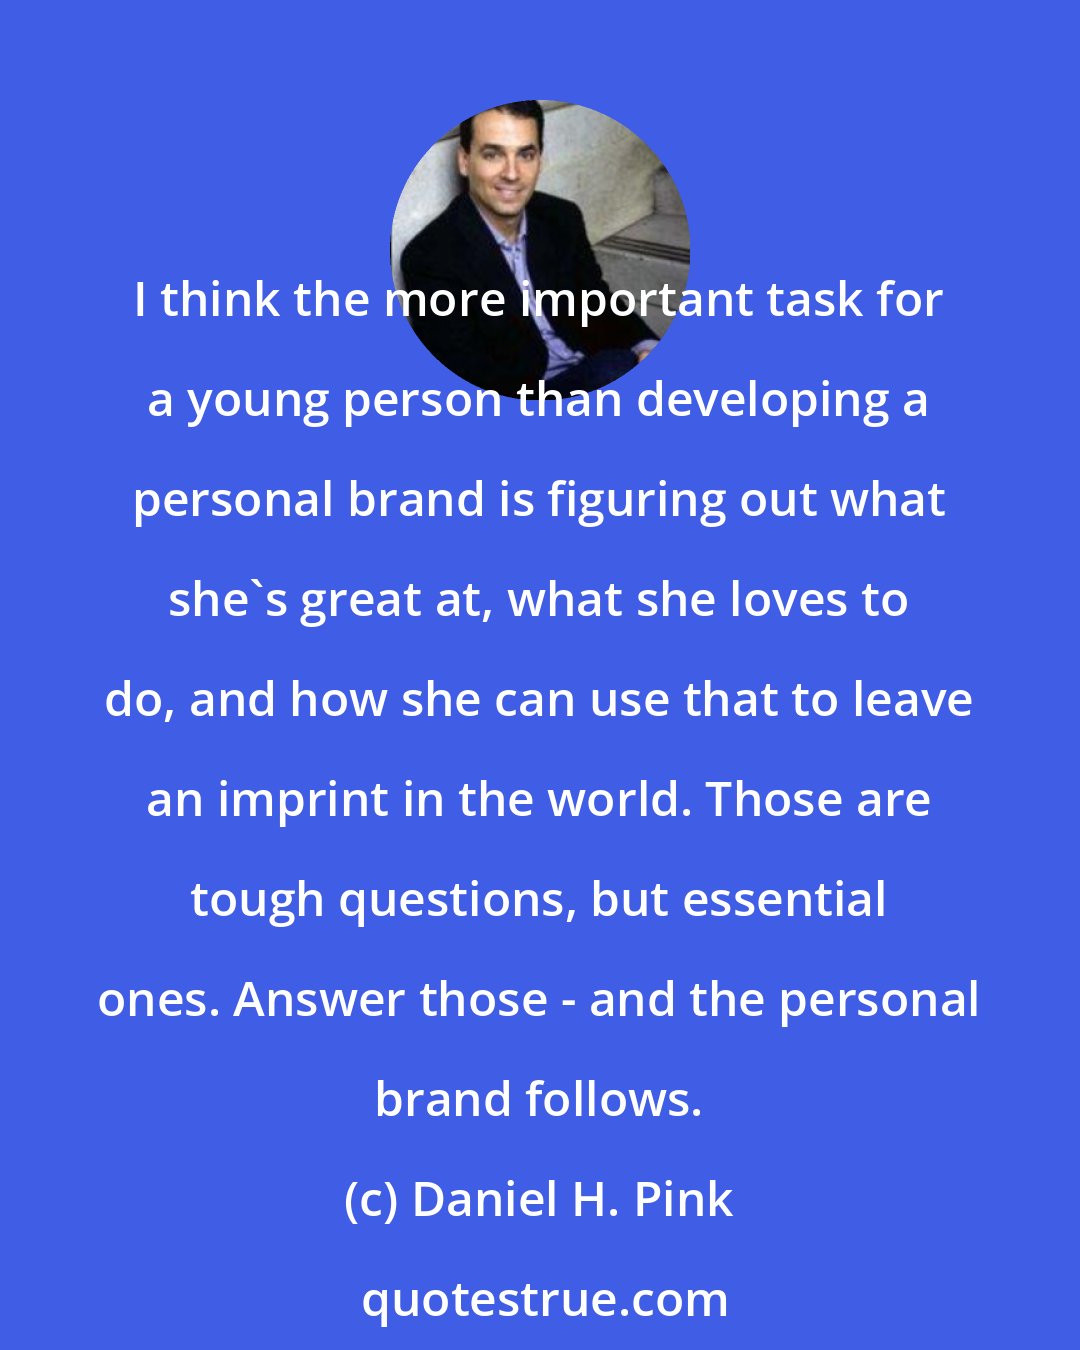 Daniel H. Pink: I think the more important task for a young person than developing a personal brand is figuring out what she's great at, what she loves to do, and how she can use that to leave an imprint in the world. Those are tough questions, but essential ones. Answer those - and the personal brand follows.